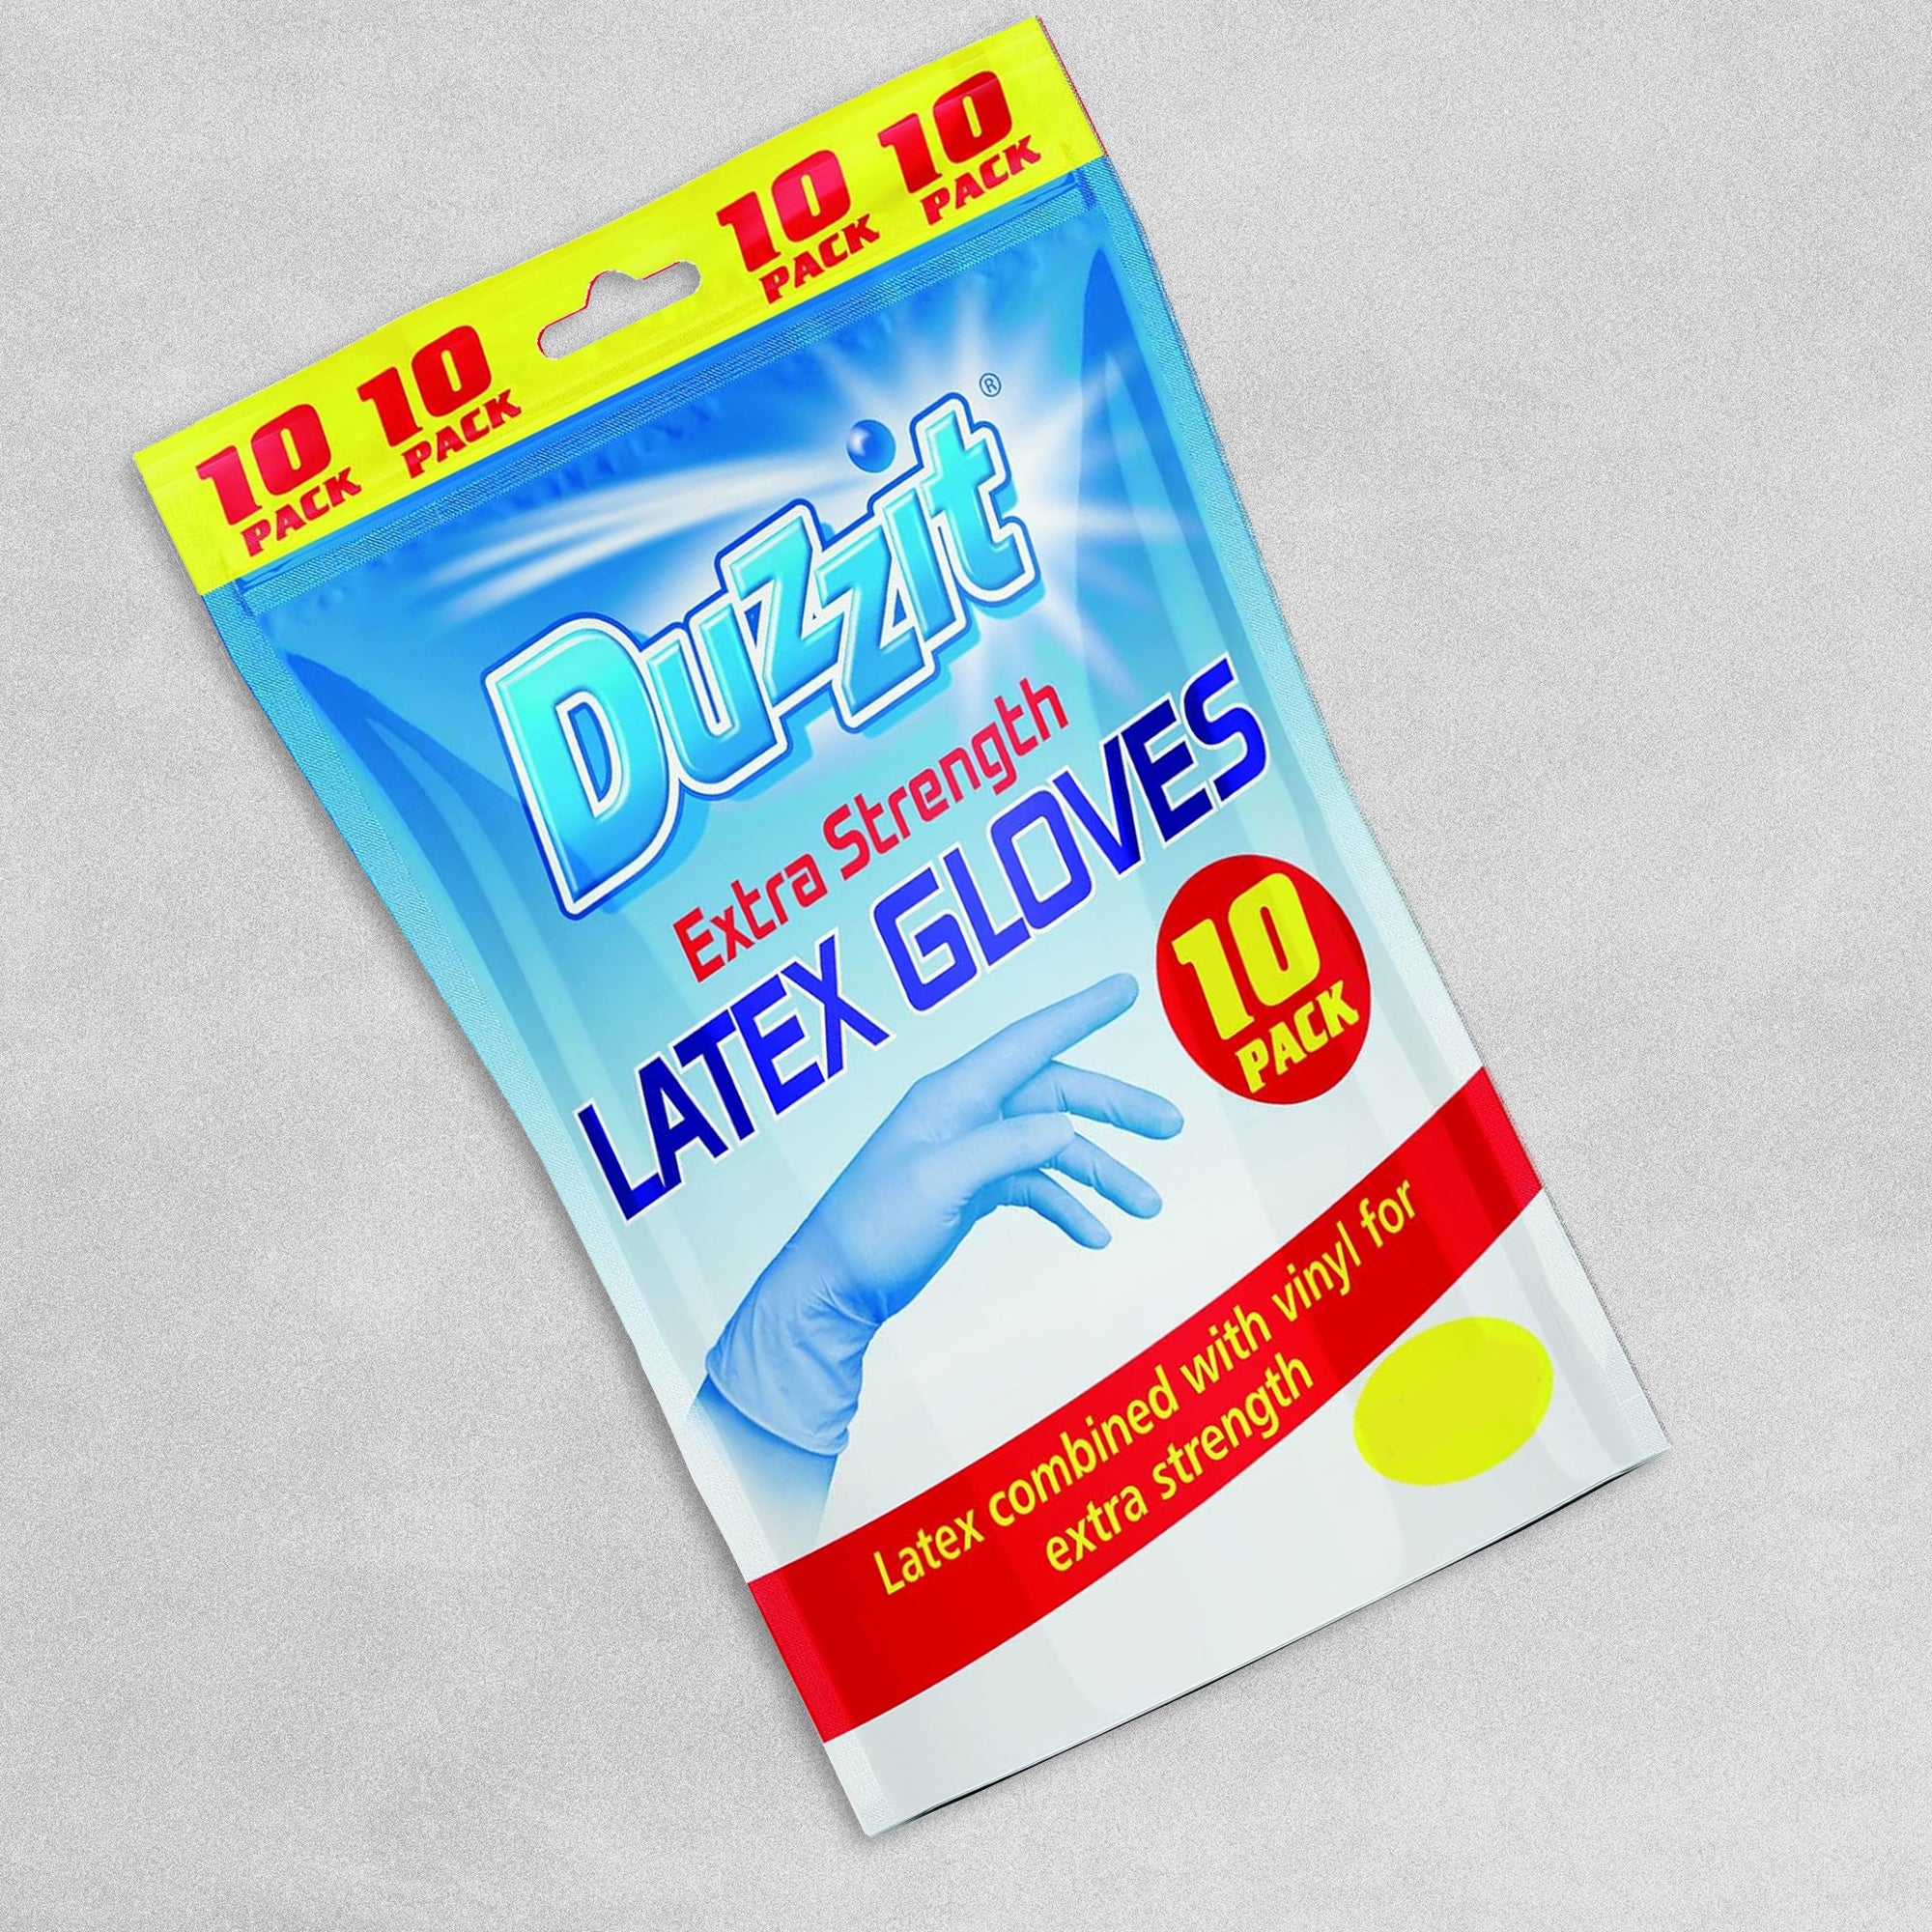 Duzzit Extra Strength Latex Gloves